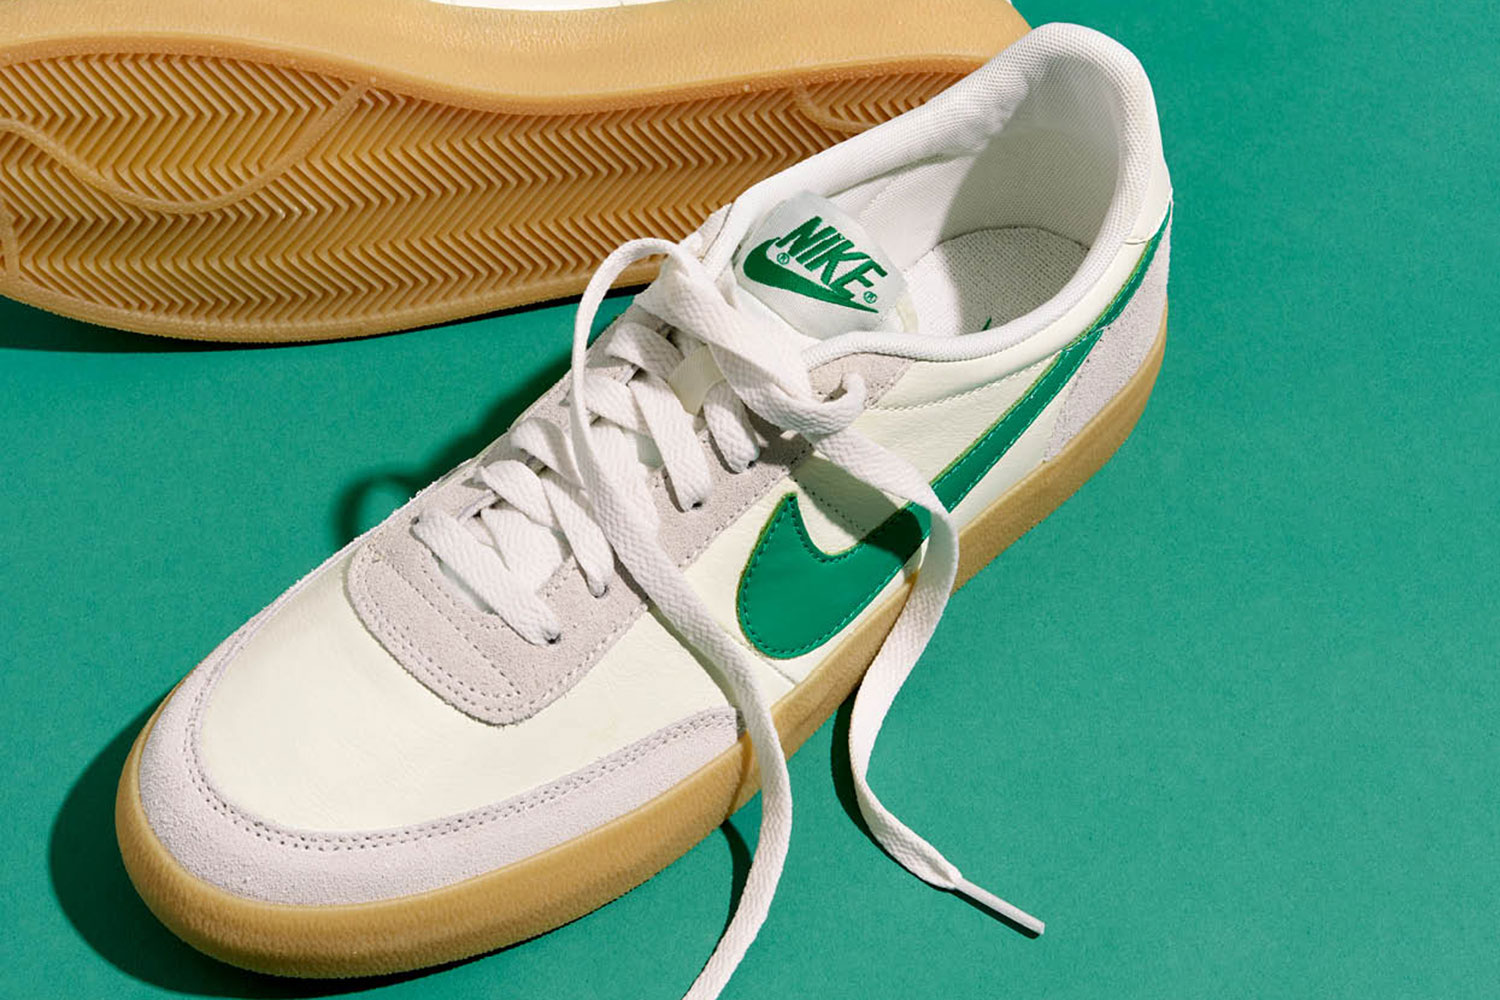 J. Crew and Nike Drop the Killshot 2 Sneaker and It's Already Sold Out | The Manual